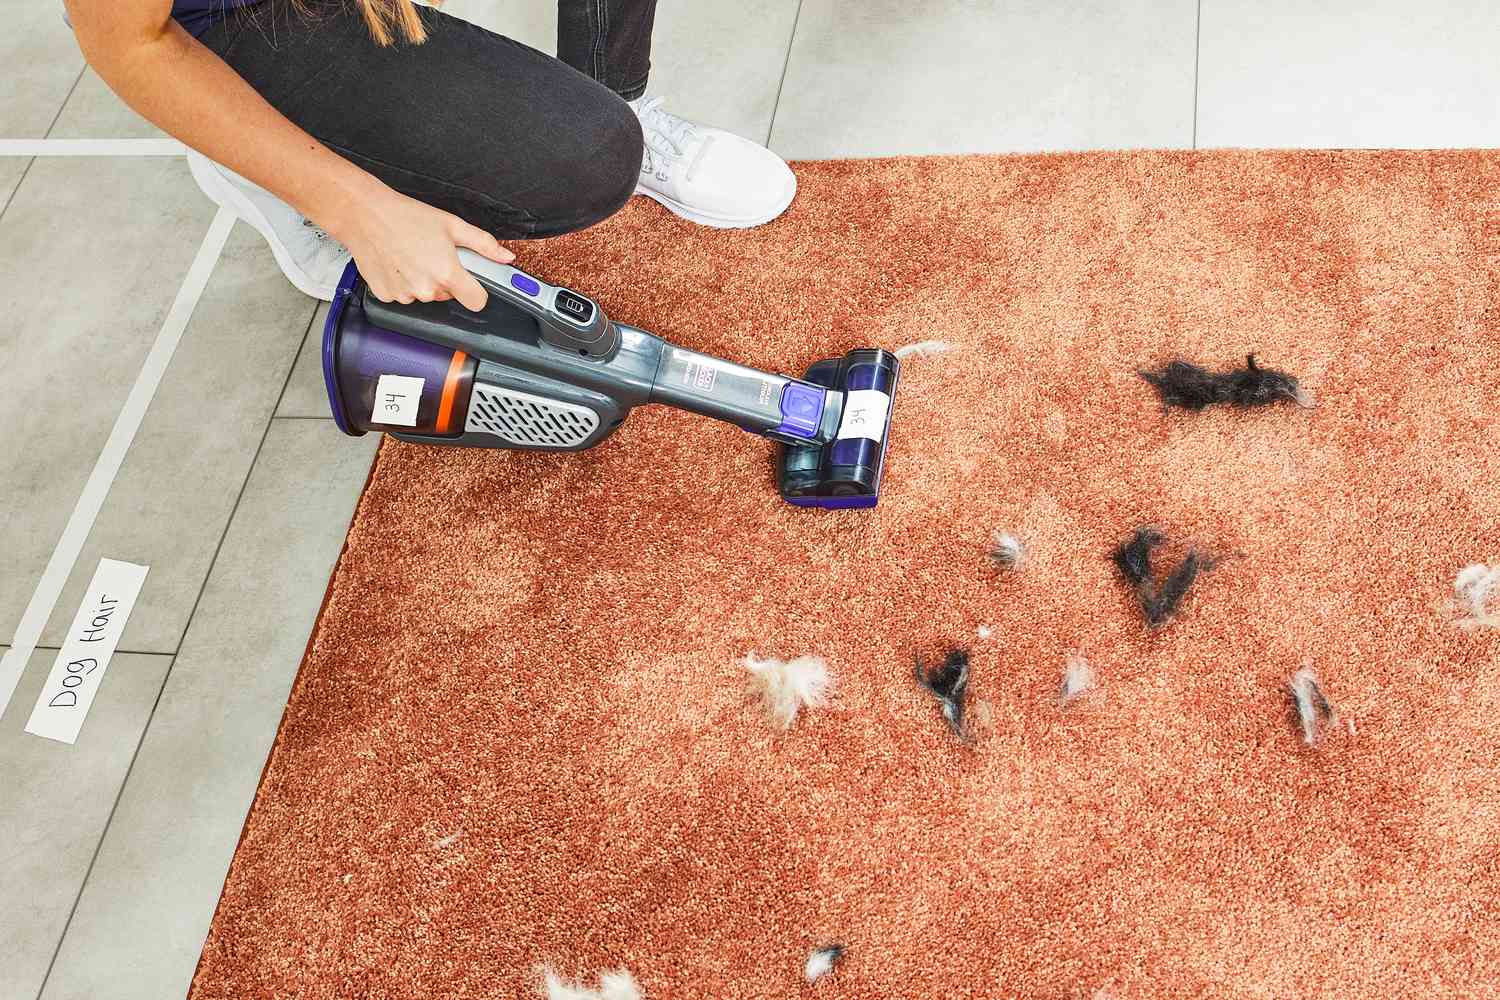 Hand using the Black+Decker Dustbuster AdvancedClean+ Pet Cordless Hand Vacuum Cleaner to clean pet hair from an orange carpet